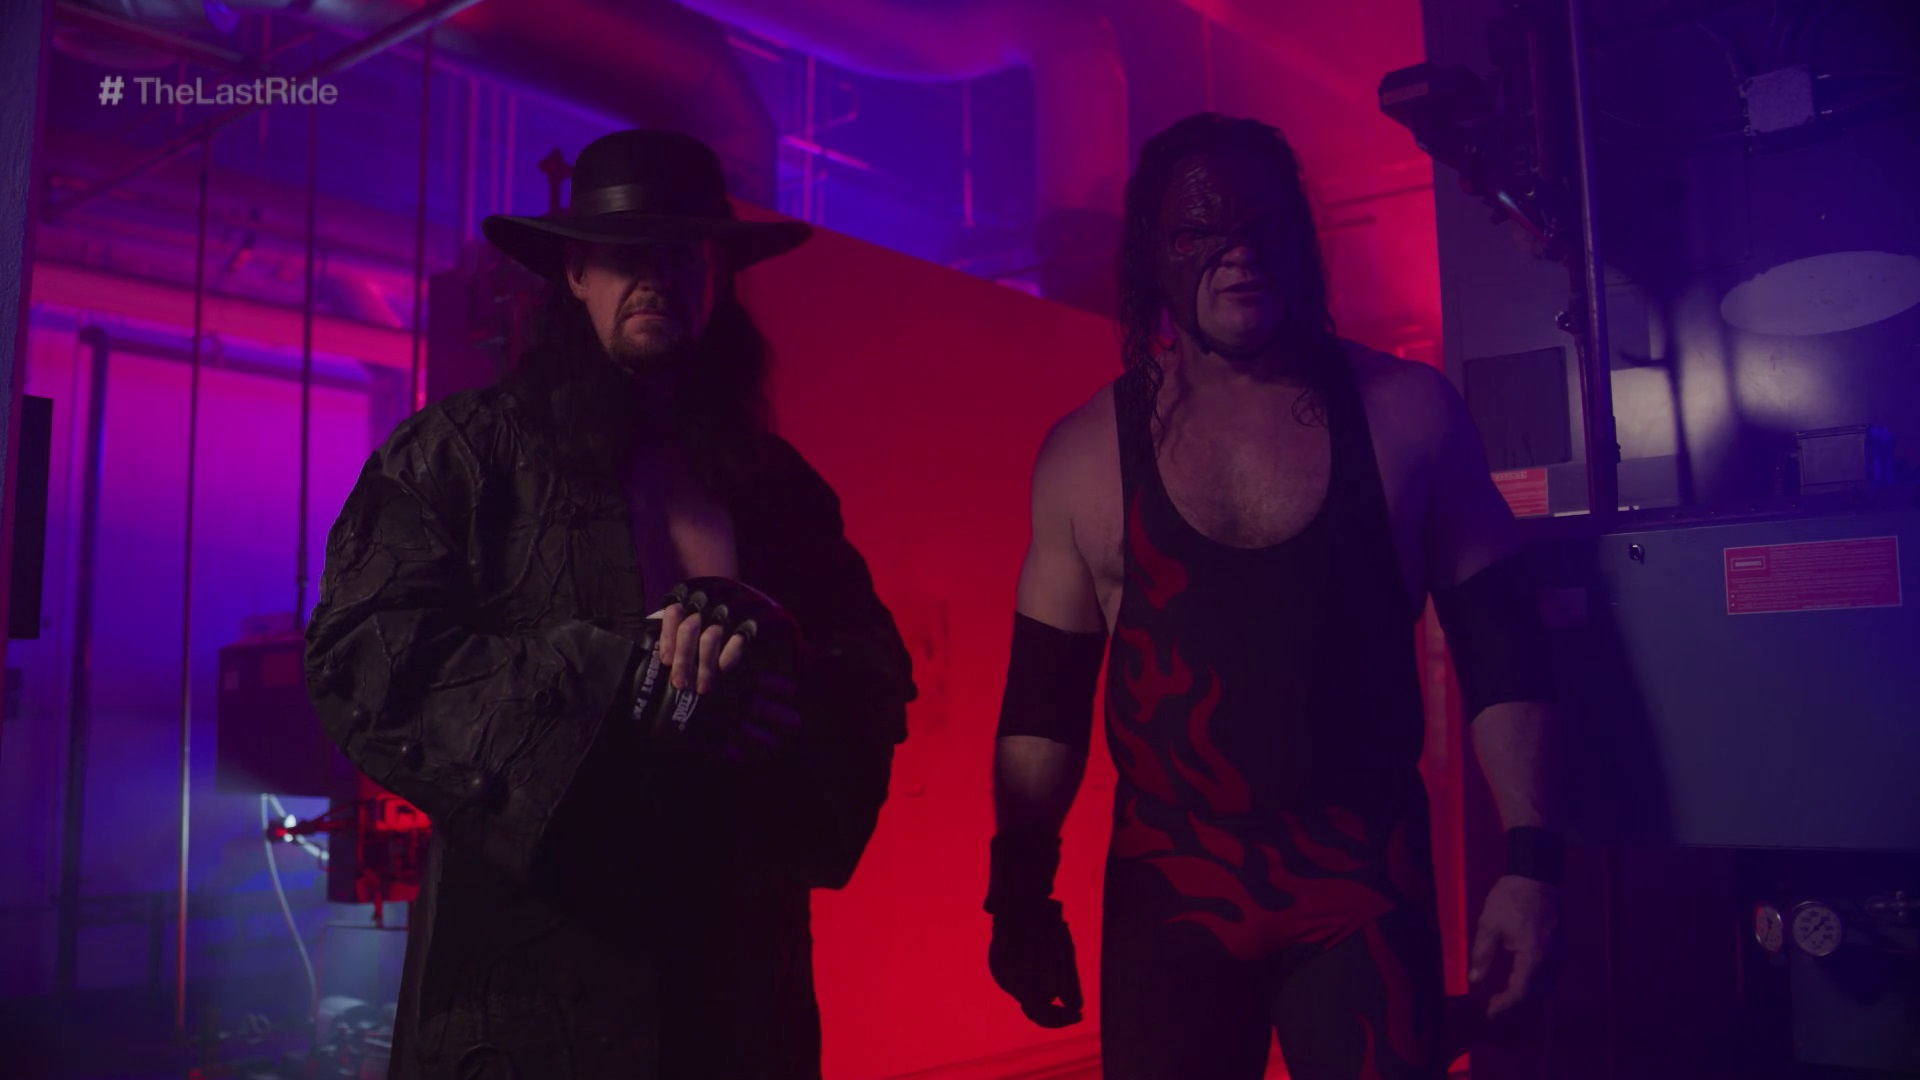 1920x1080 The funny fake take on a promo The Undertaker and Kane in 2018 | Superfights